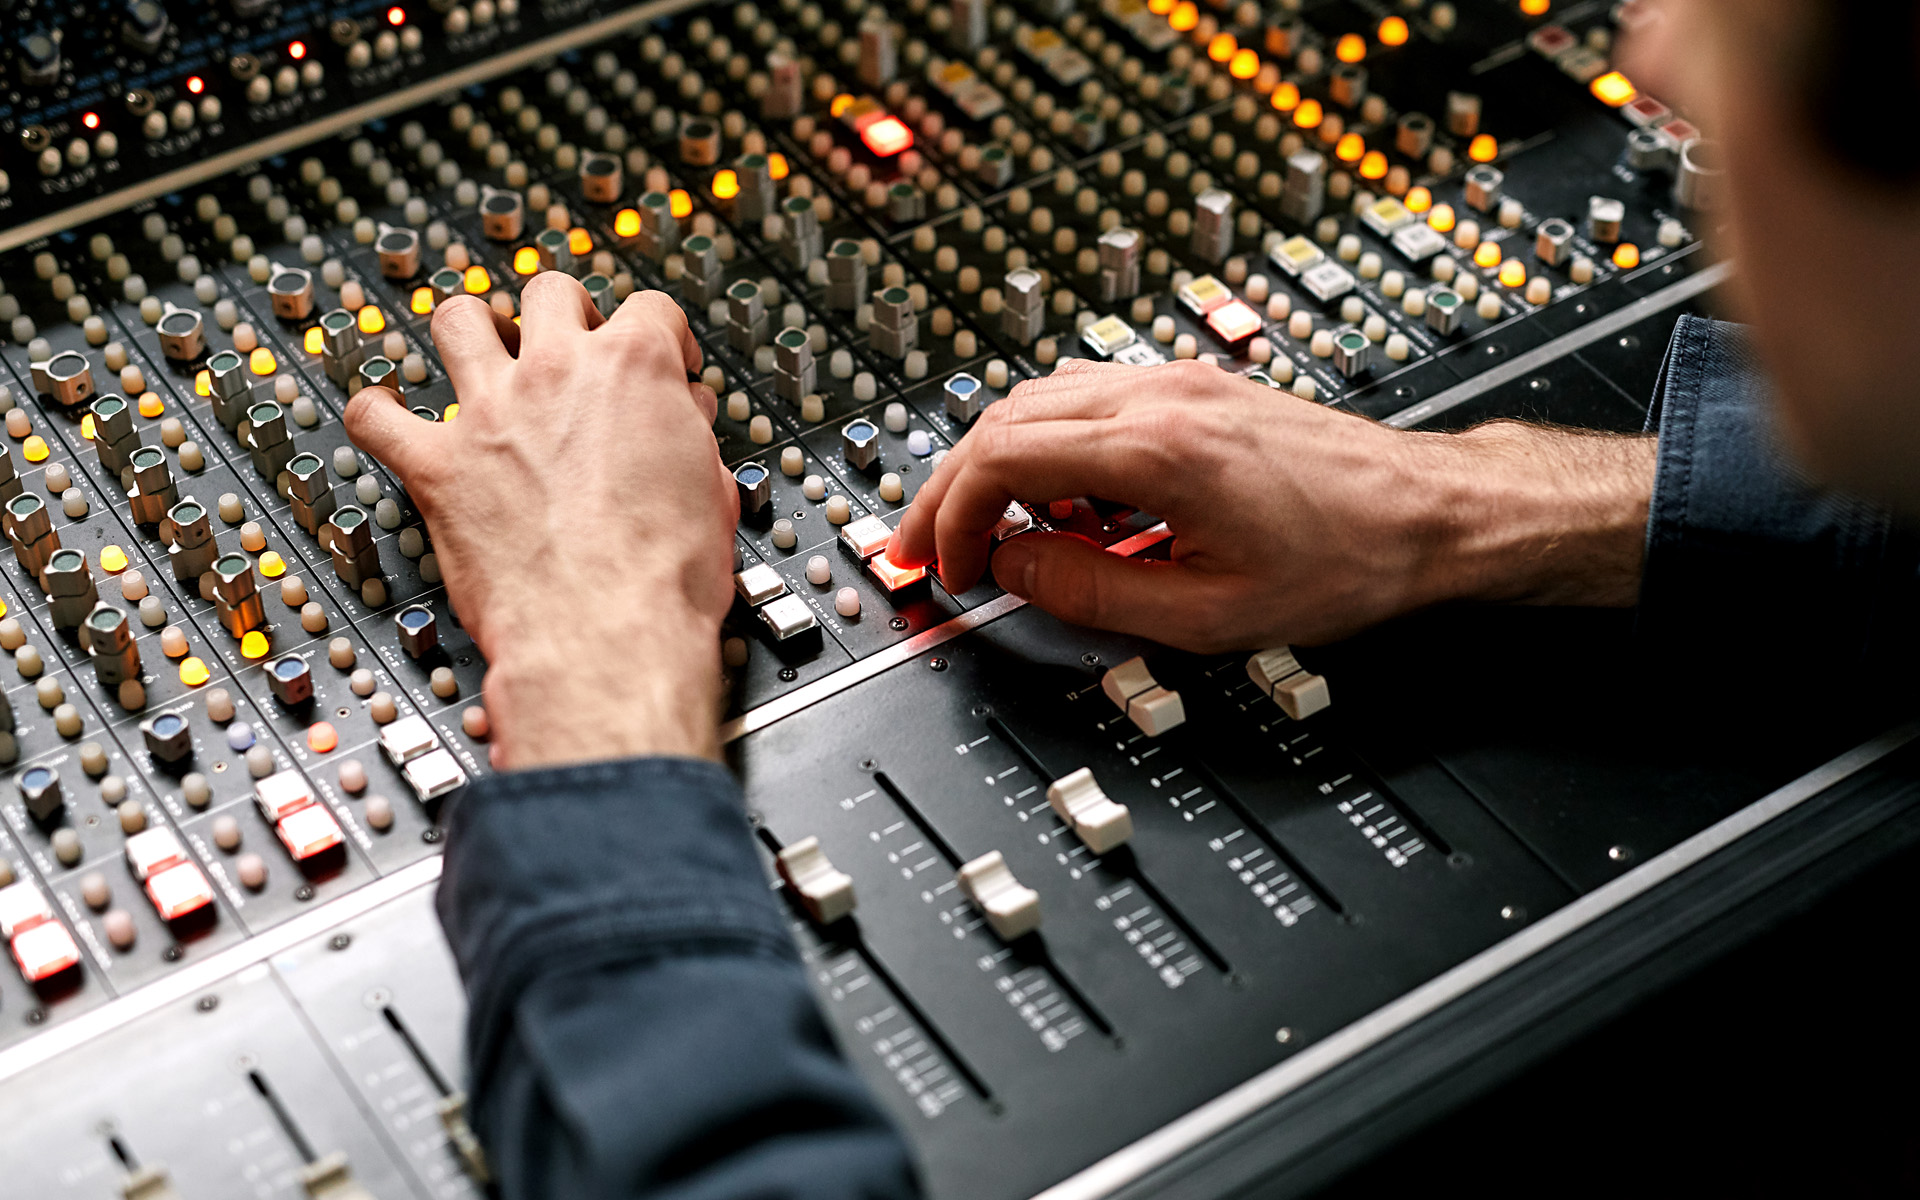 Hands on a sound board in a recording studio.